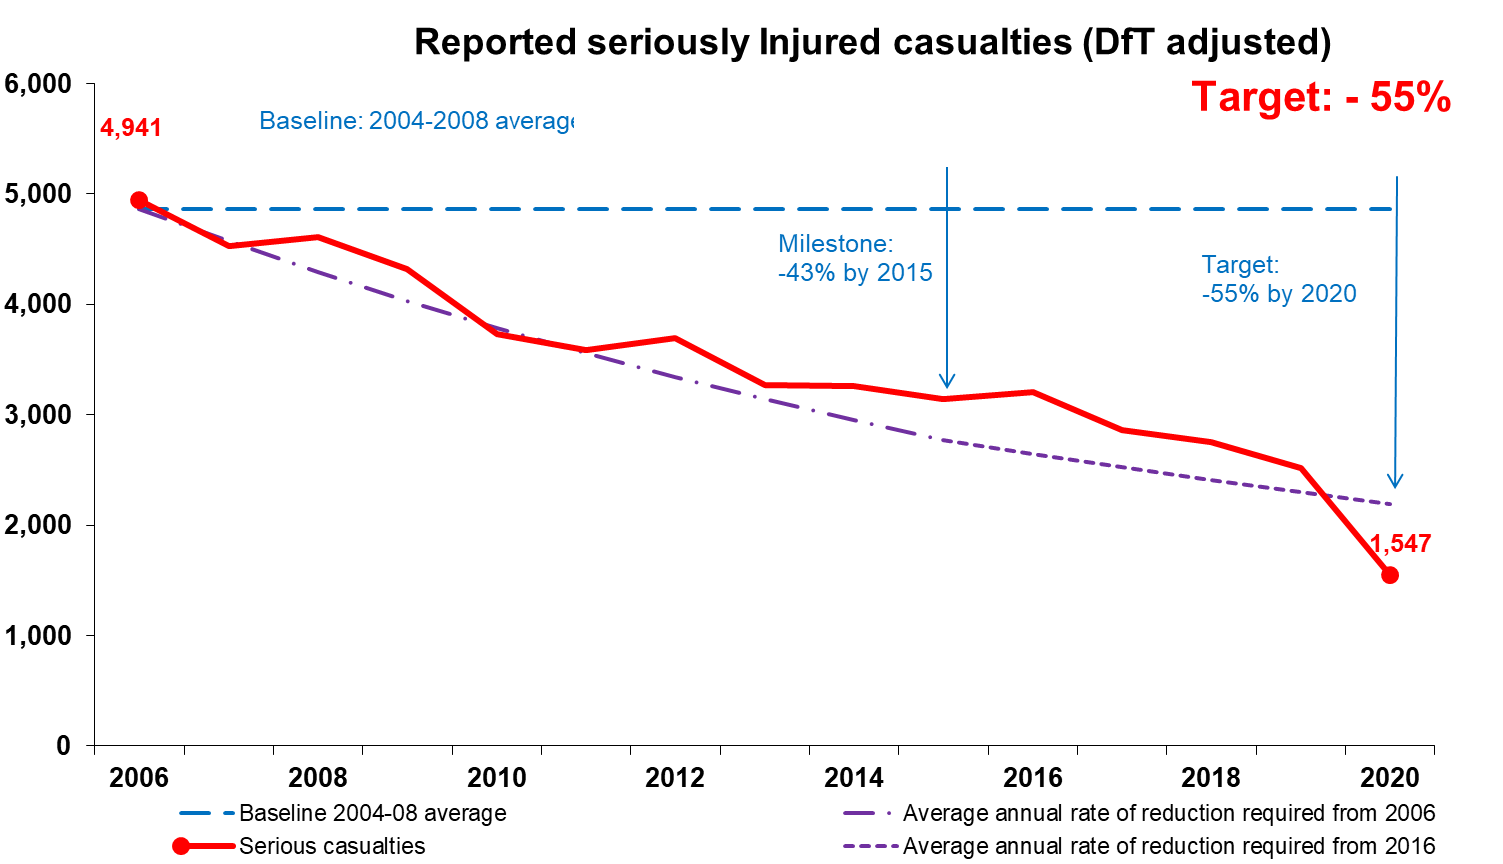 Figure 4 shows that the reduction has exceeded the framework target for 2020 (a reduction of 55% from 2004-08). Prior to the casualty reductions in 2020, Scotland had seen significant reductions but was not on track to meet this target. The reduction achieved in 2020 compared to previous years should be seen in the wider context of lower level of road traffic in Scotland in 2020 due to the Covid-19 pandemic.